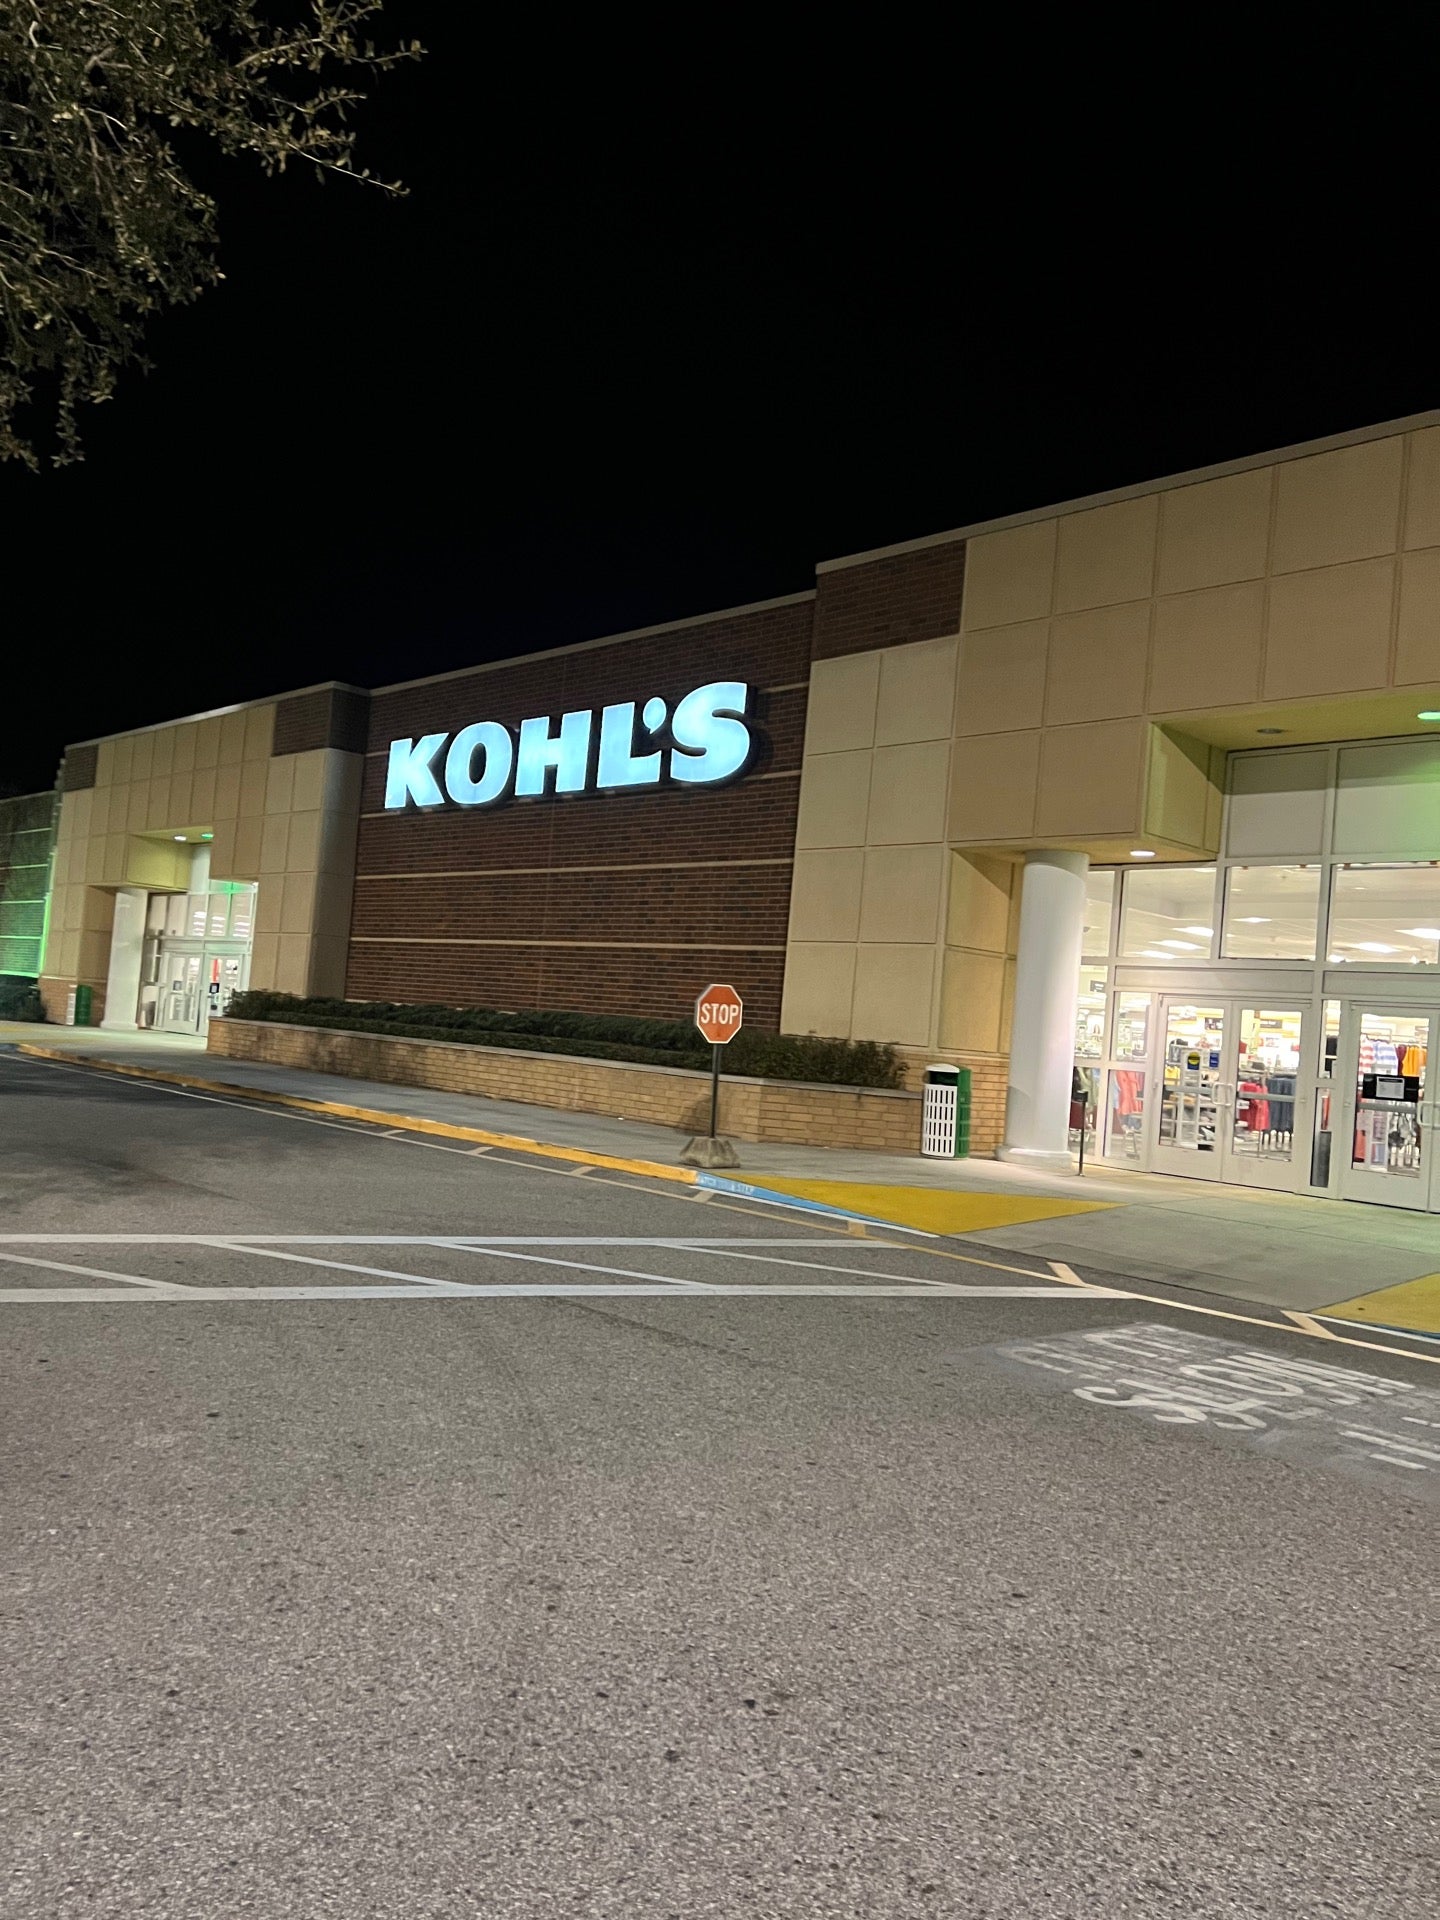 KOHL'S - 16 Reviews - 12305 US Highway 27, Clermont, Florida - Department  Stores - Phone Number - Yelp